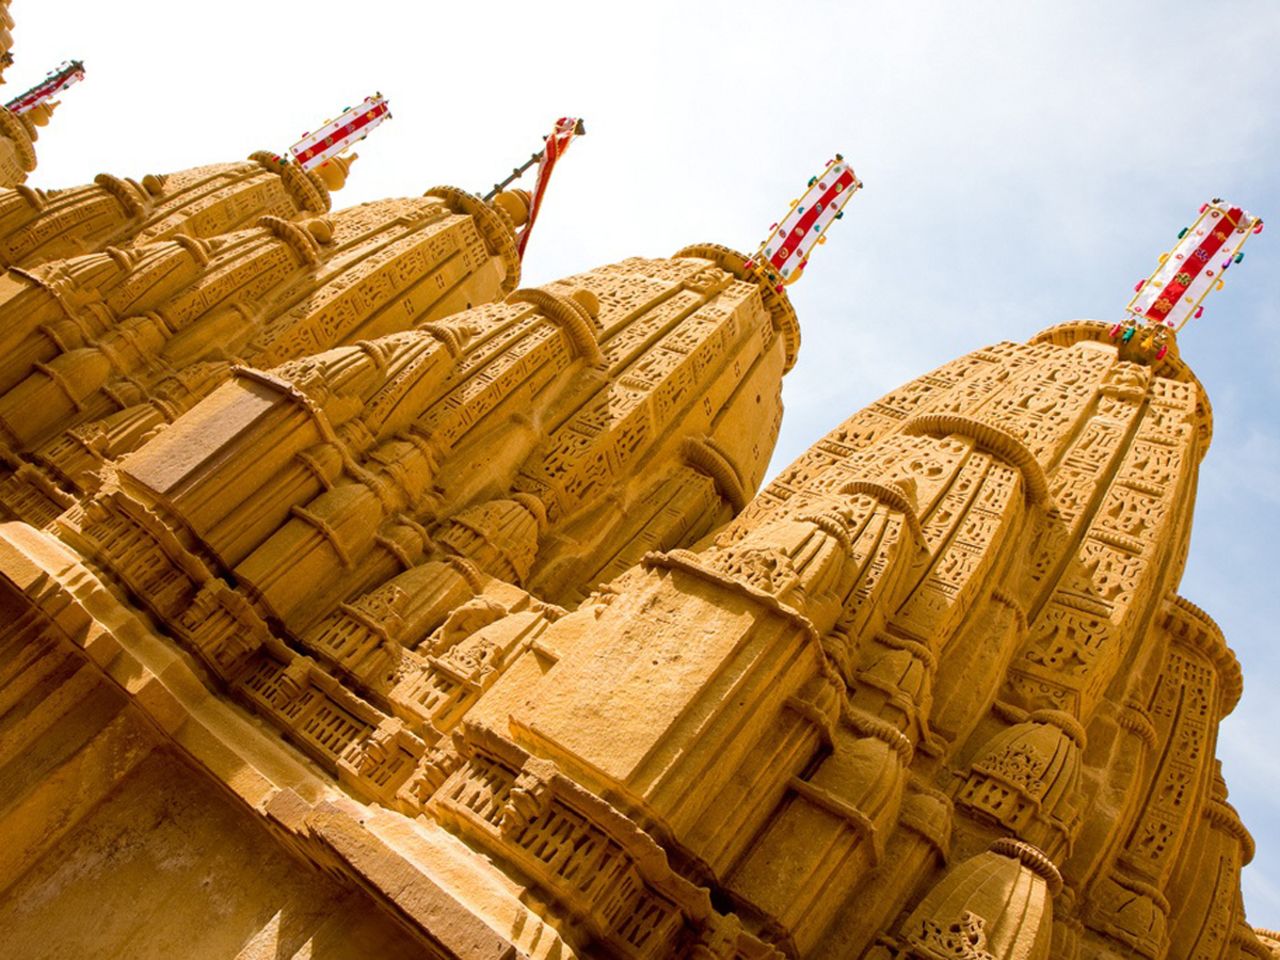 <strong>The Gold City:</strong> While Jaipur and Jodphur have multiple buildings sporting their signature shades, Jaisalmer has just one. Established in 1156, the city gets its nickname from the magnificent Jaisalmer Fort, which appears to lord over the city from a hilltop perch.